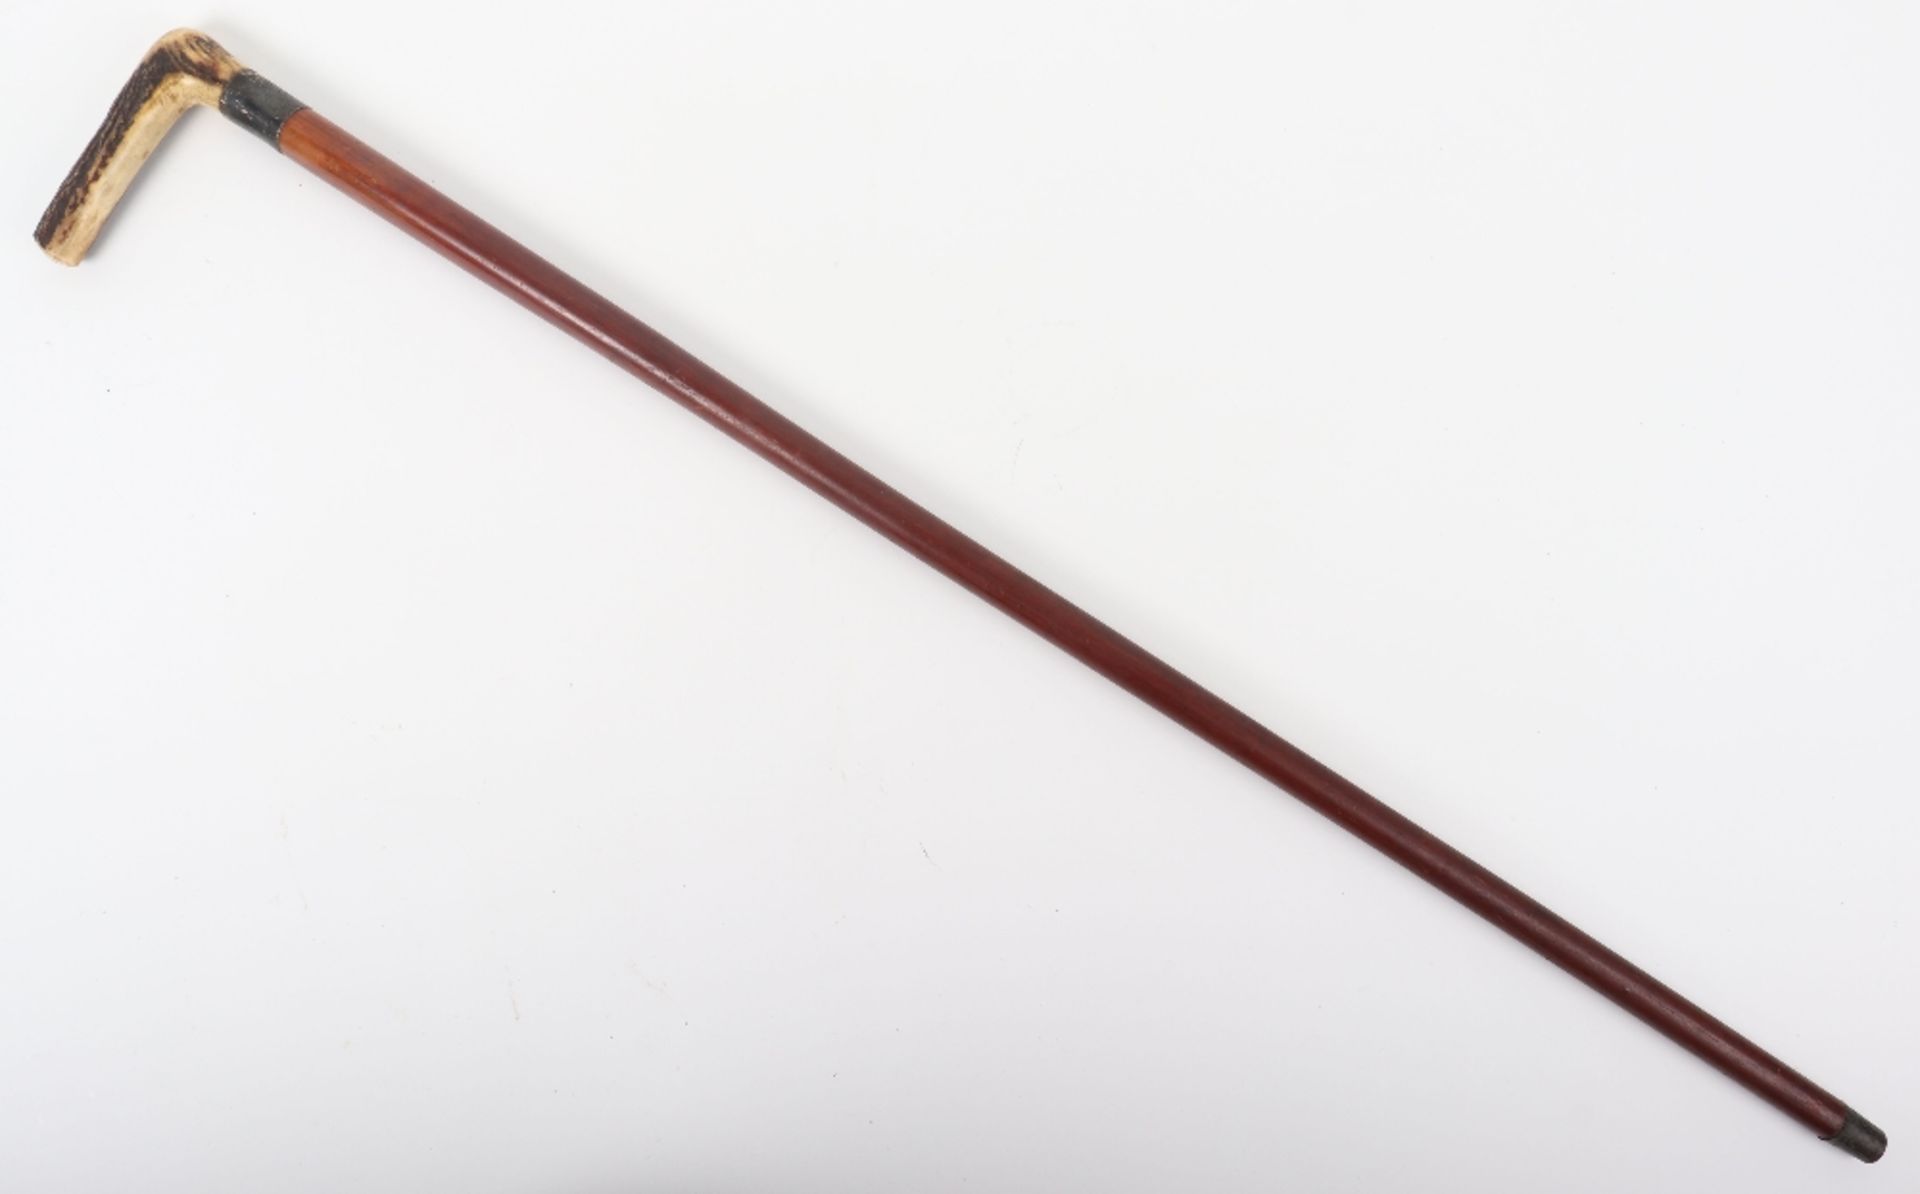 An Edwardian walking stick with spirit level (lacking liquid) and scaled ruler, with horn handle